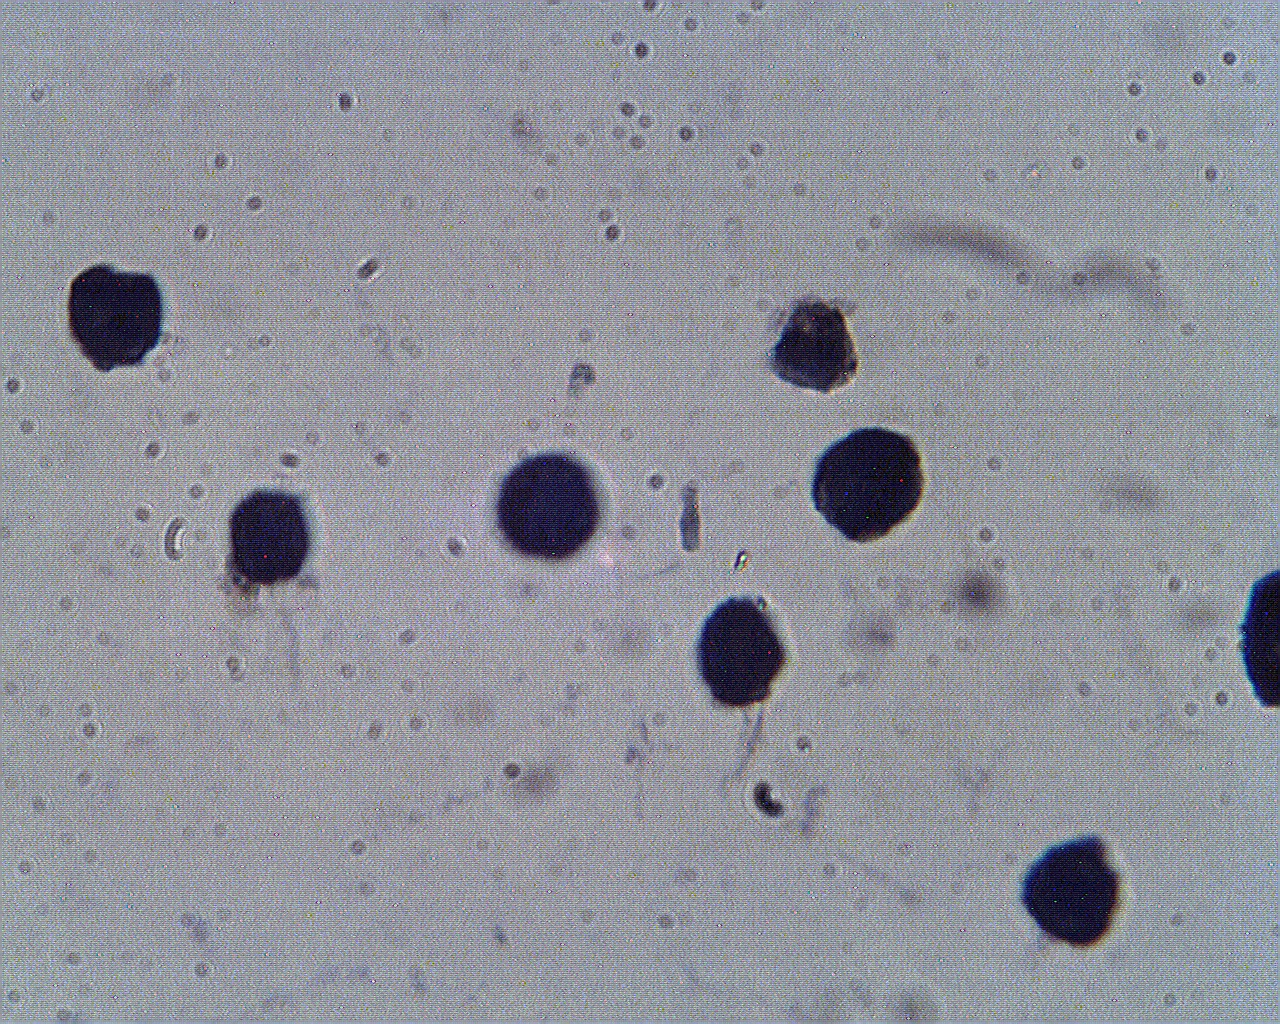 Staining of Hep G2 cells with PCSK9 antibody (Cat. No. X2740P) at 2 µg/ml.